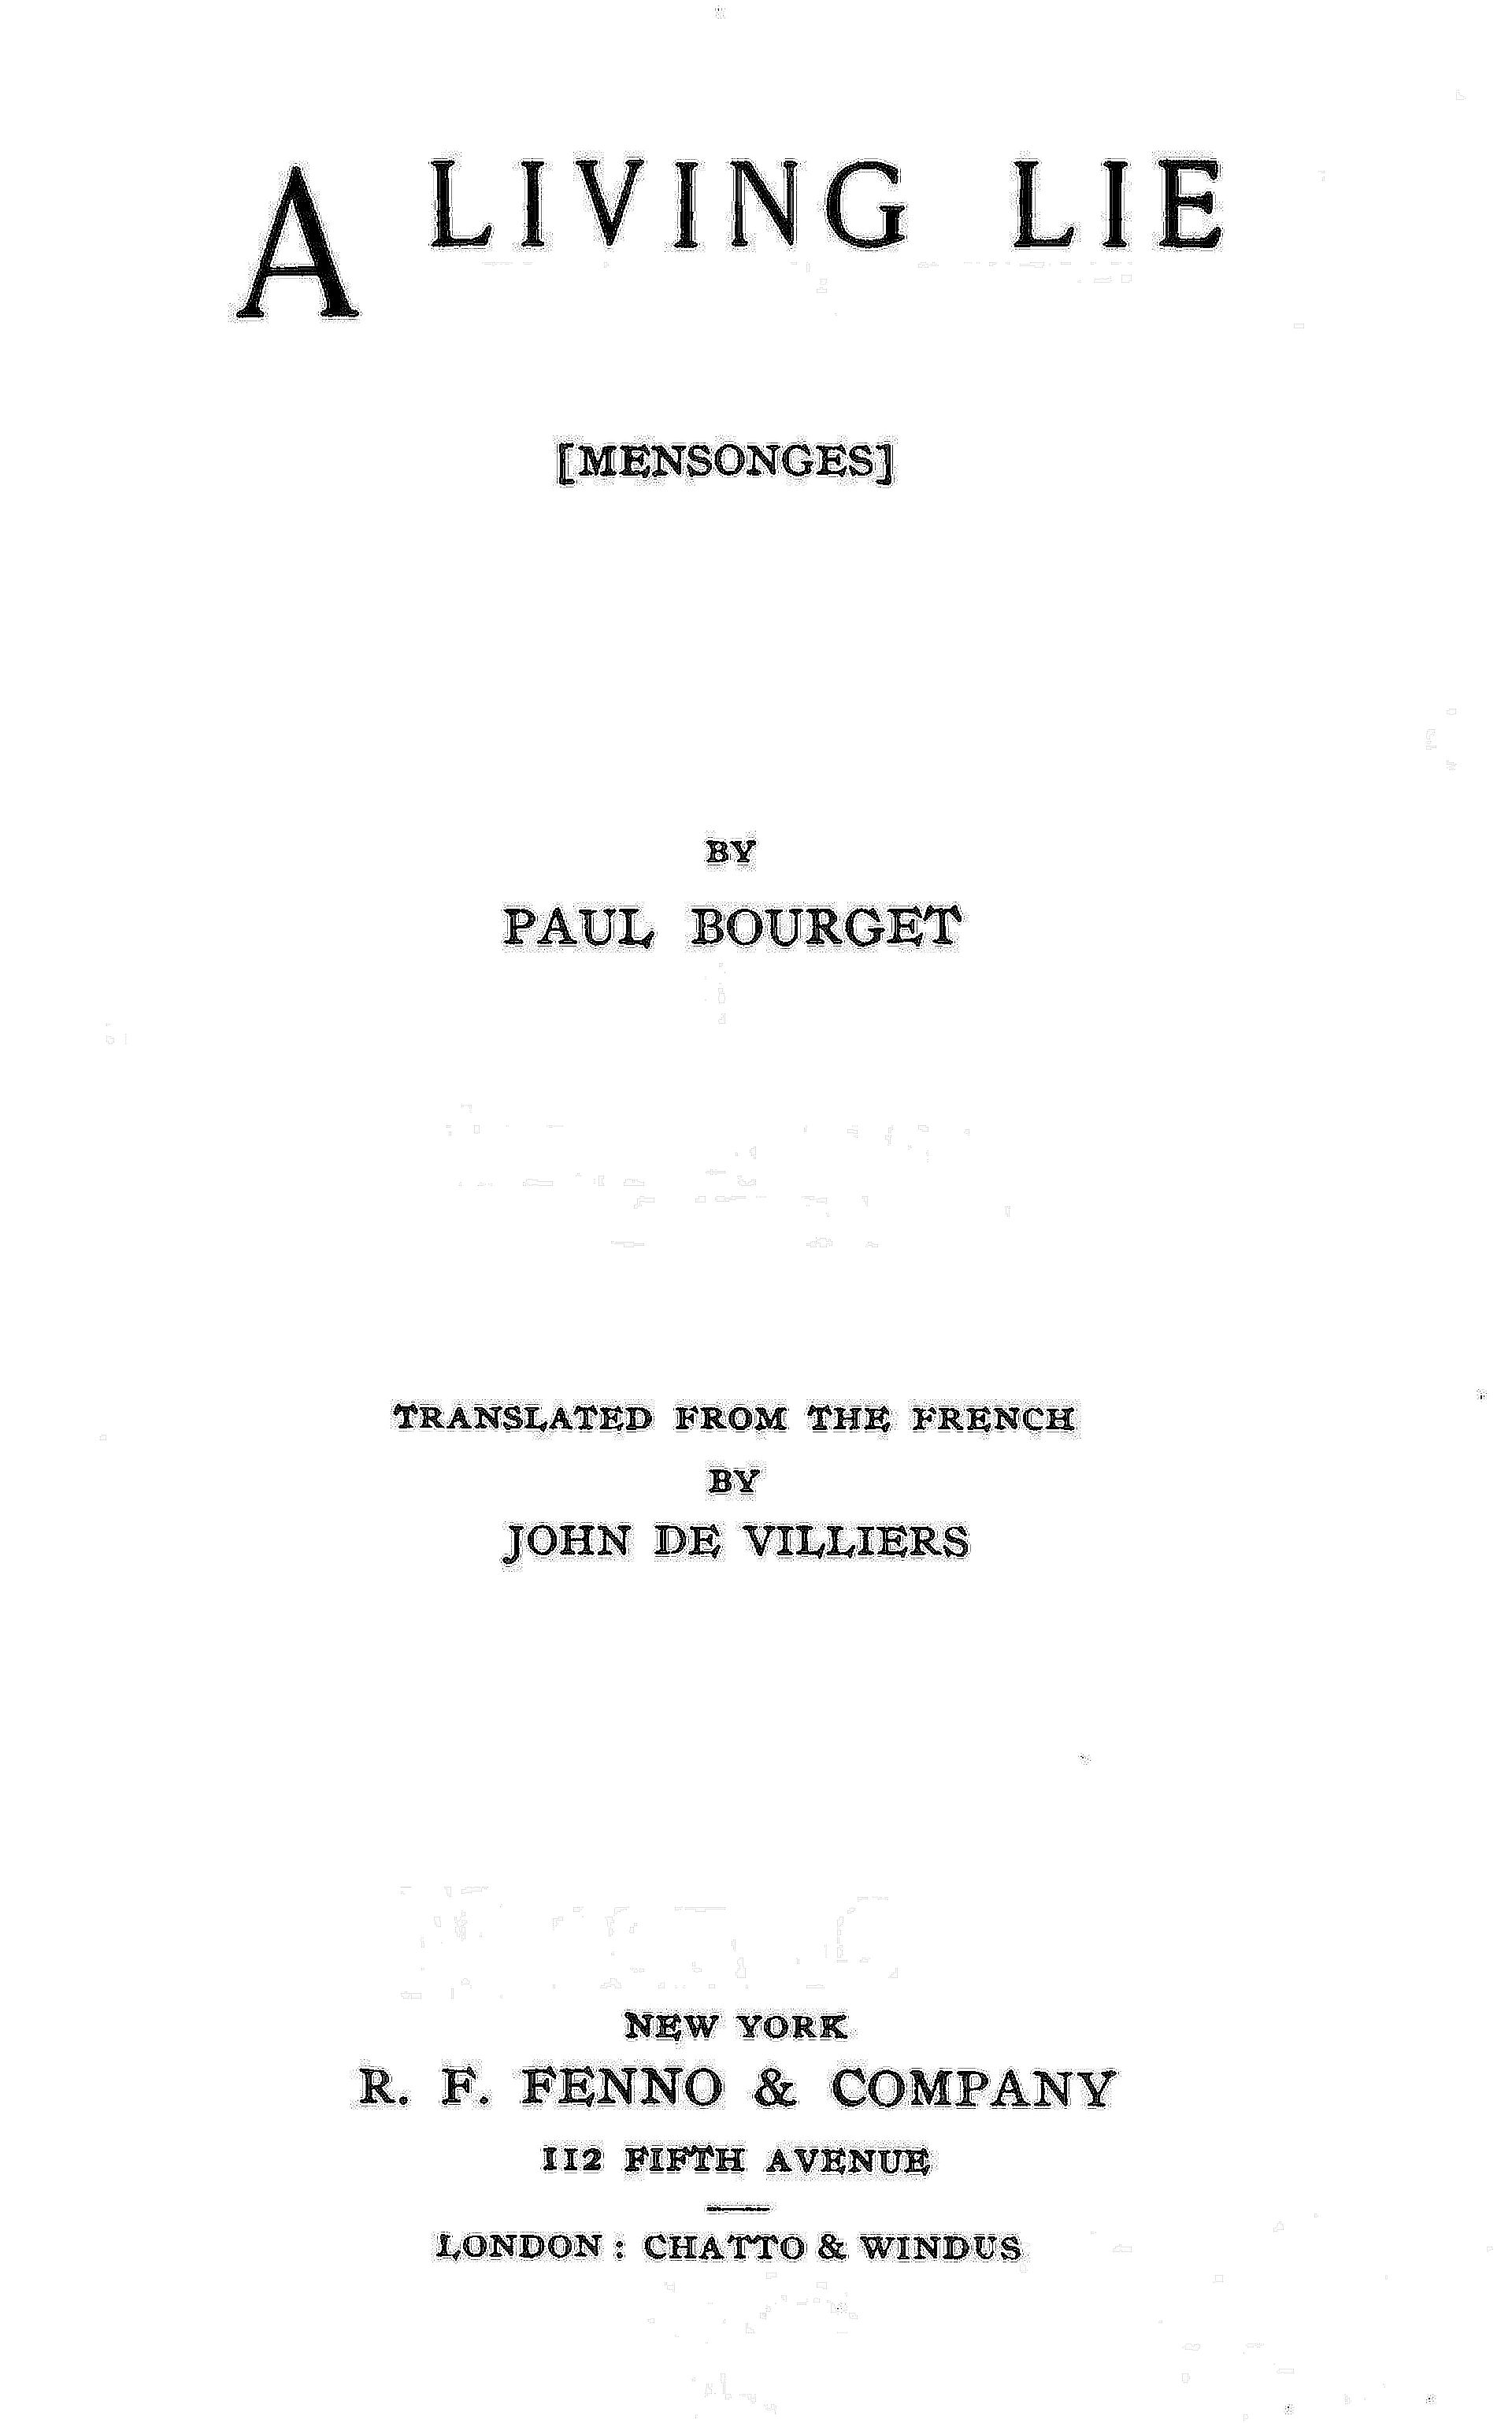 The Project Gutenberg eBook of A Living Lie, by Paul Bourget. image